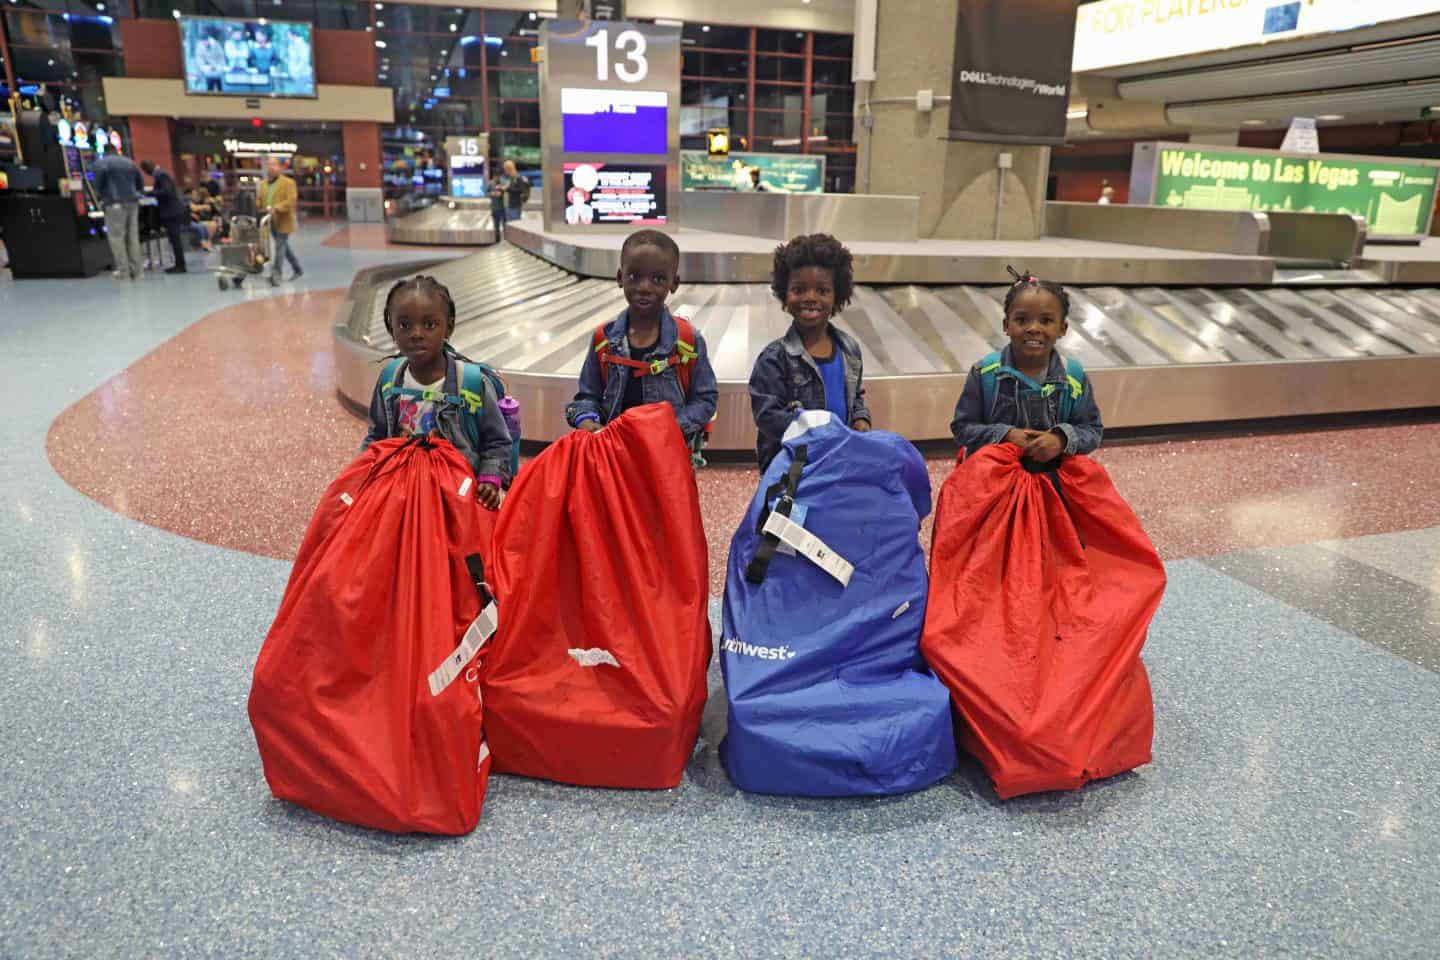 4 kids with their carseats in the baggage claim area of an airport - how to avoid extra fees when flying spirit airlines